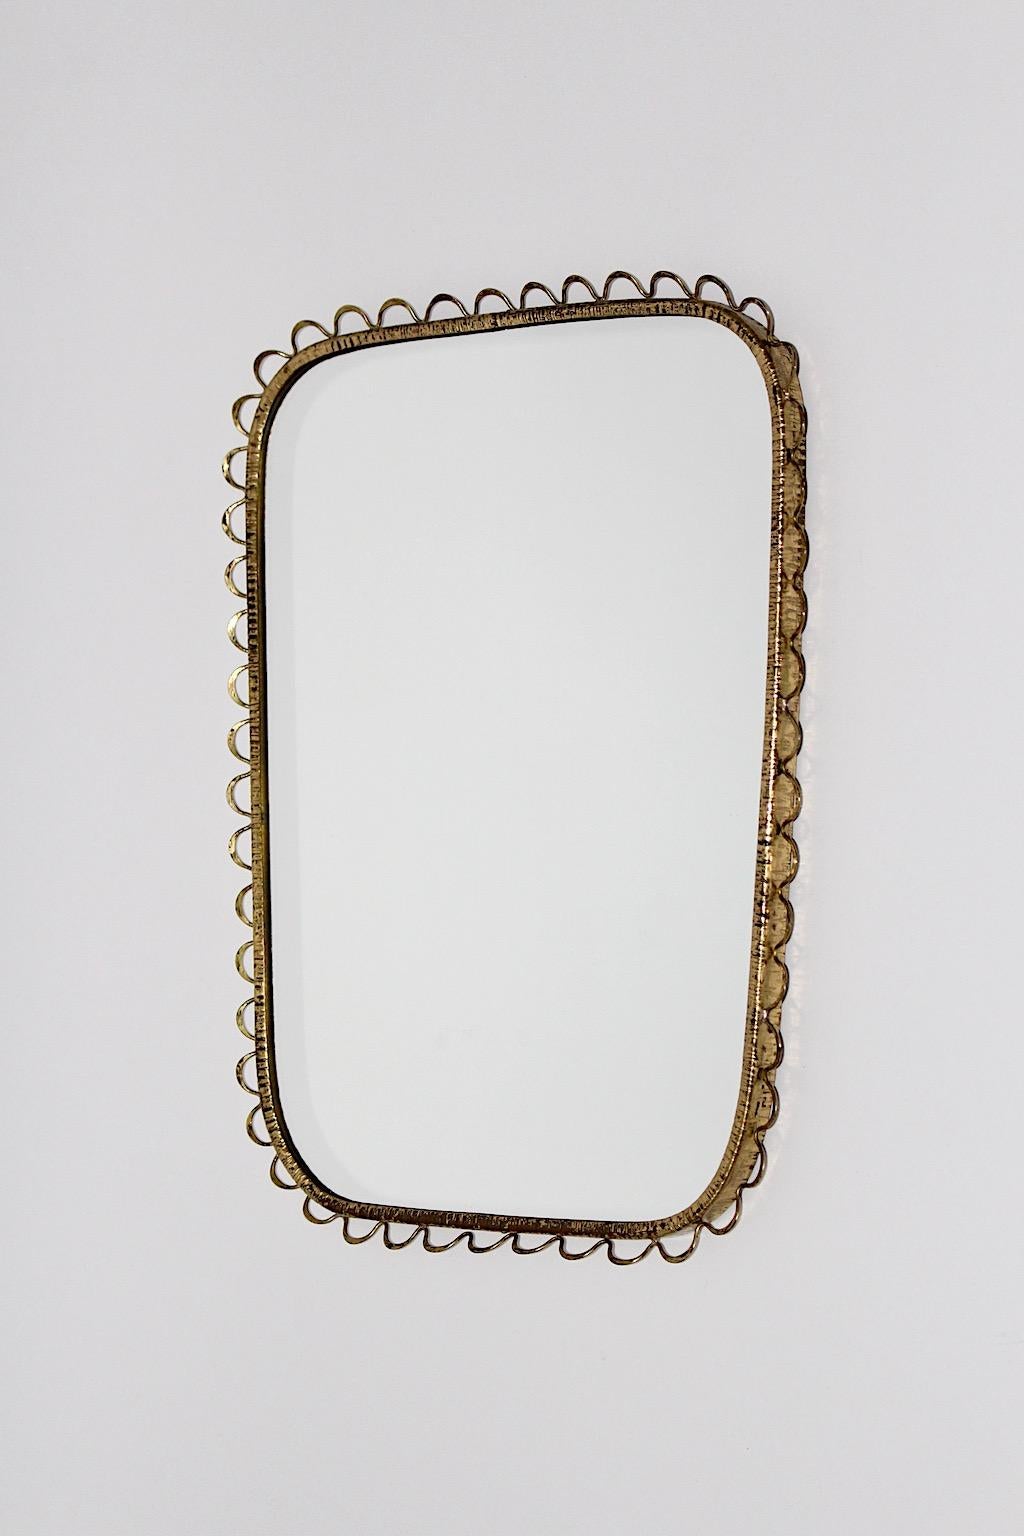 Mid-Century Modern vintage wall mirror rectangular like from brass with small loops 1950s Italy.
A stunning wall mirror rectangular like with brass frame and delicate loops as decor 1950s Italy.
This wall mirror works perfectly near your